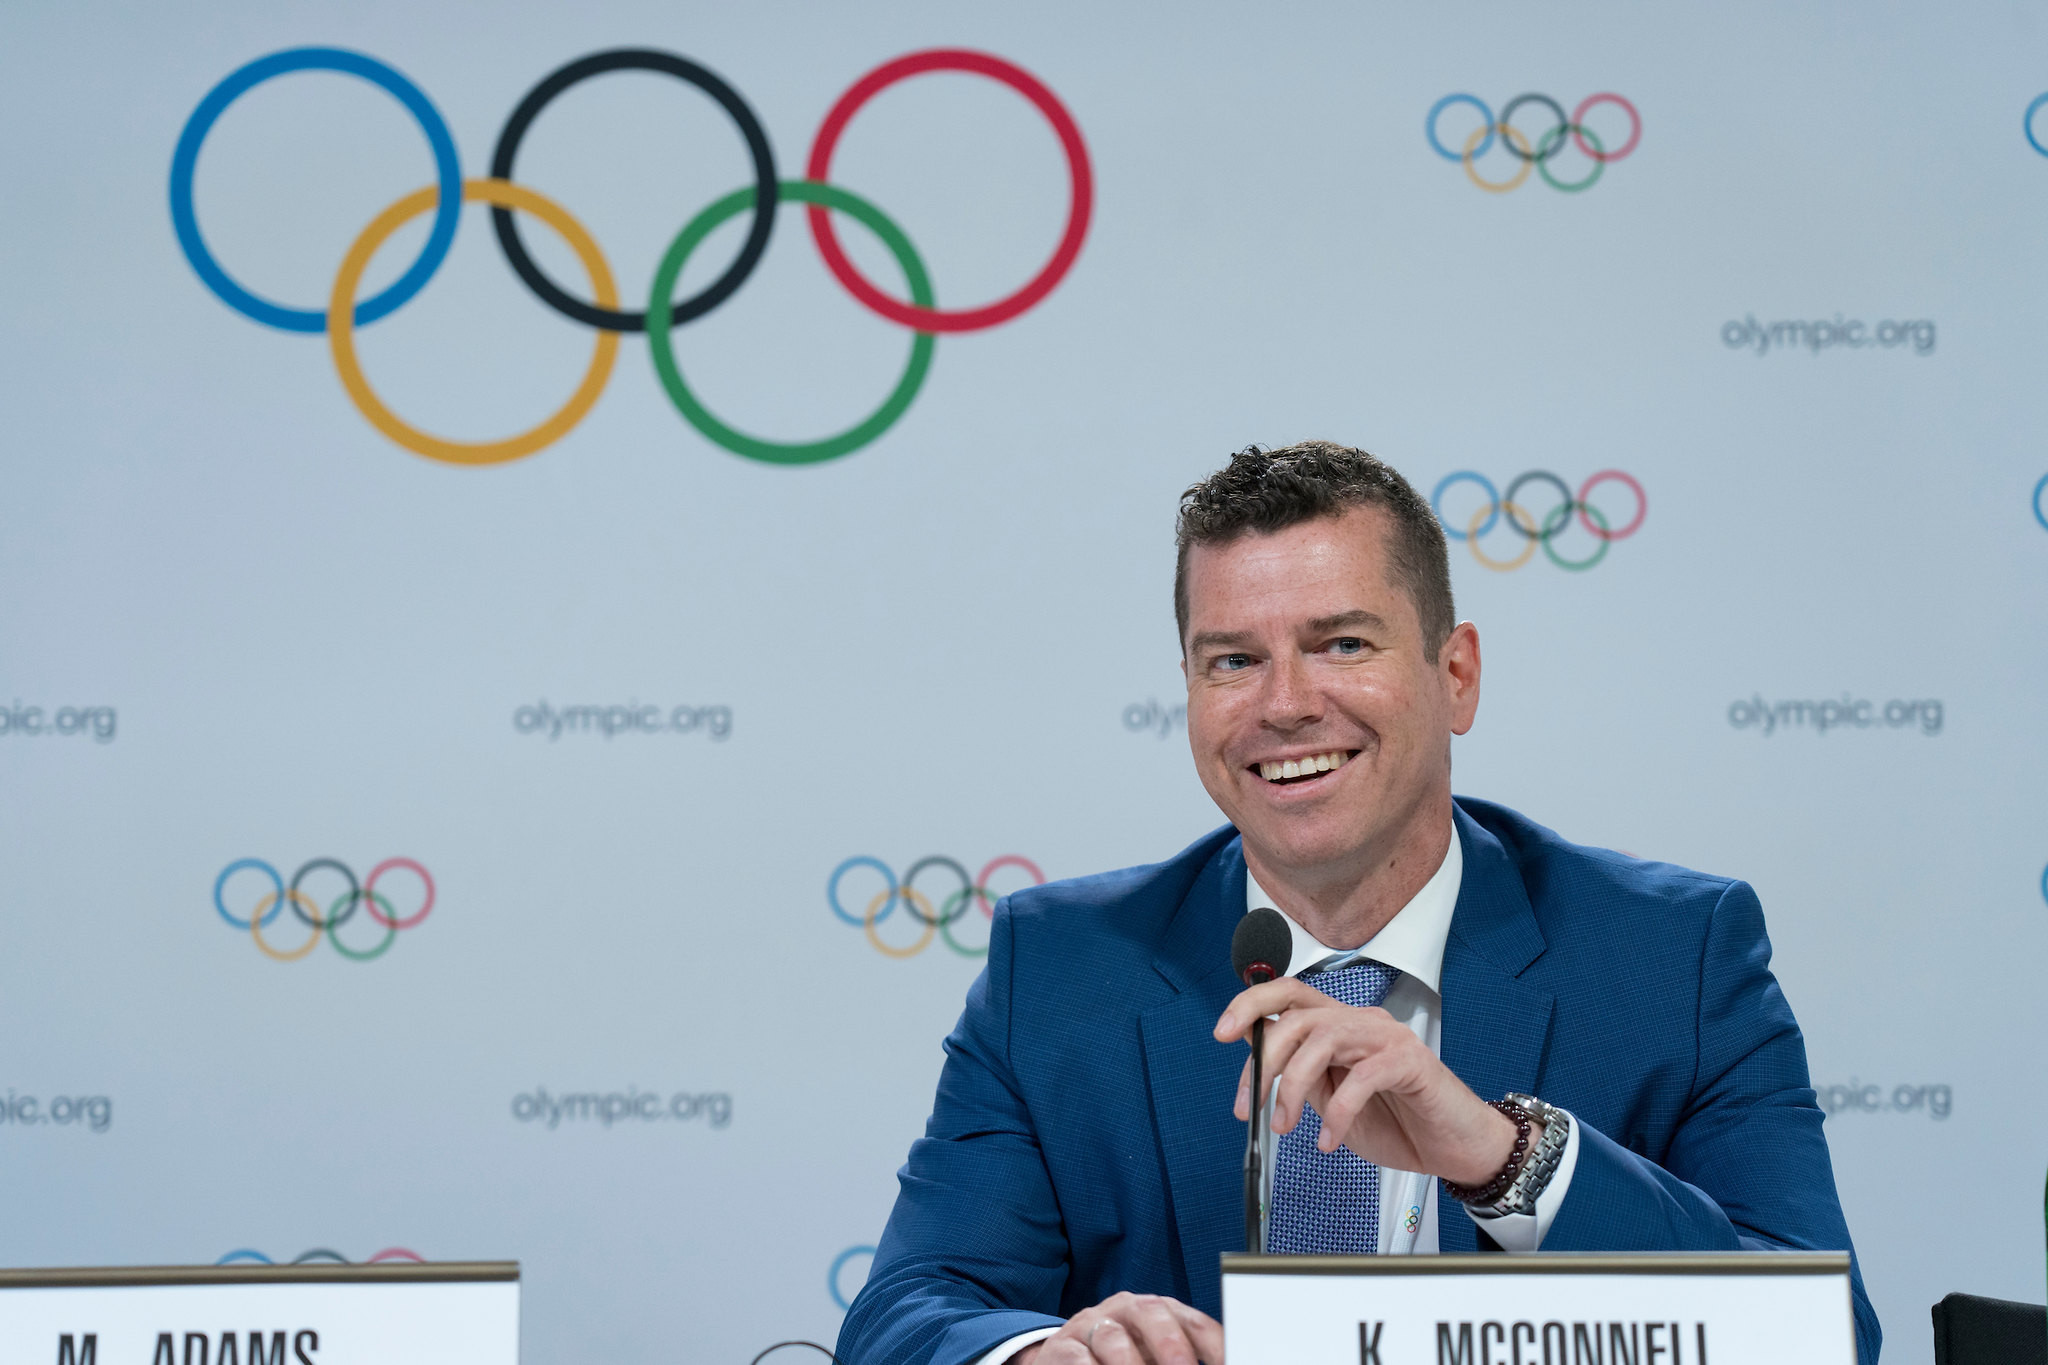 IOC sports director Kit McConnell provided an update on the AIBA situation to the Session ©IOC